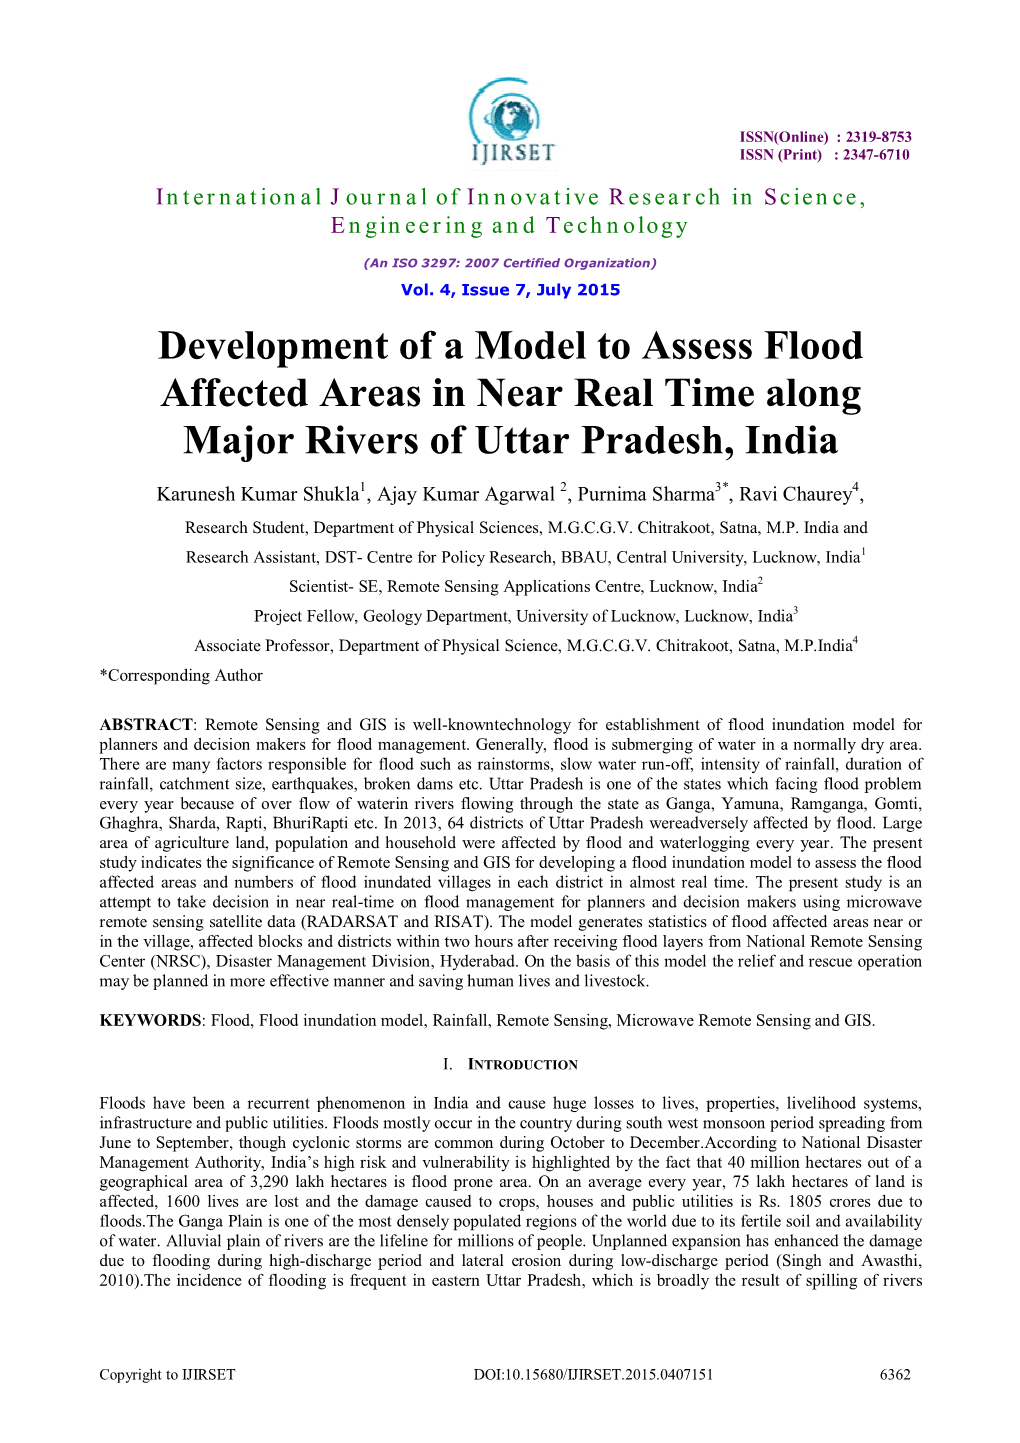 Development of a Model to Assess Flood Affected Areas in Near Real Time Along Major Rivers of Uttar Pradesh, India